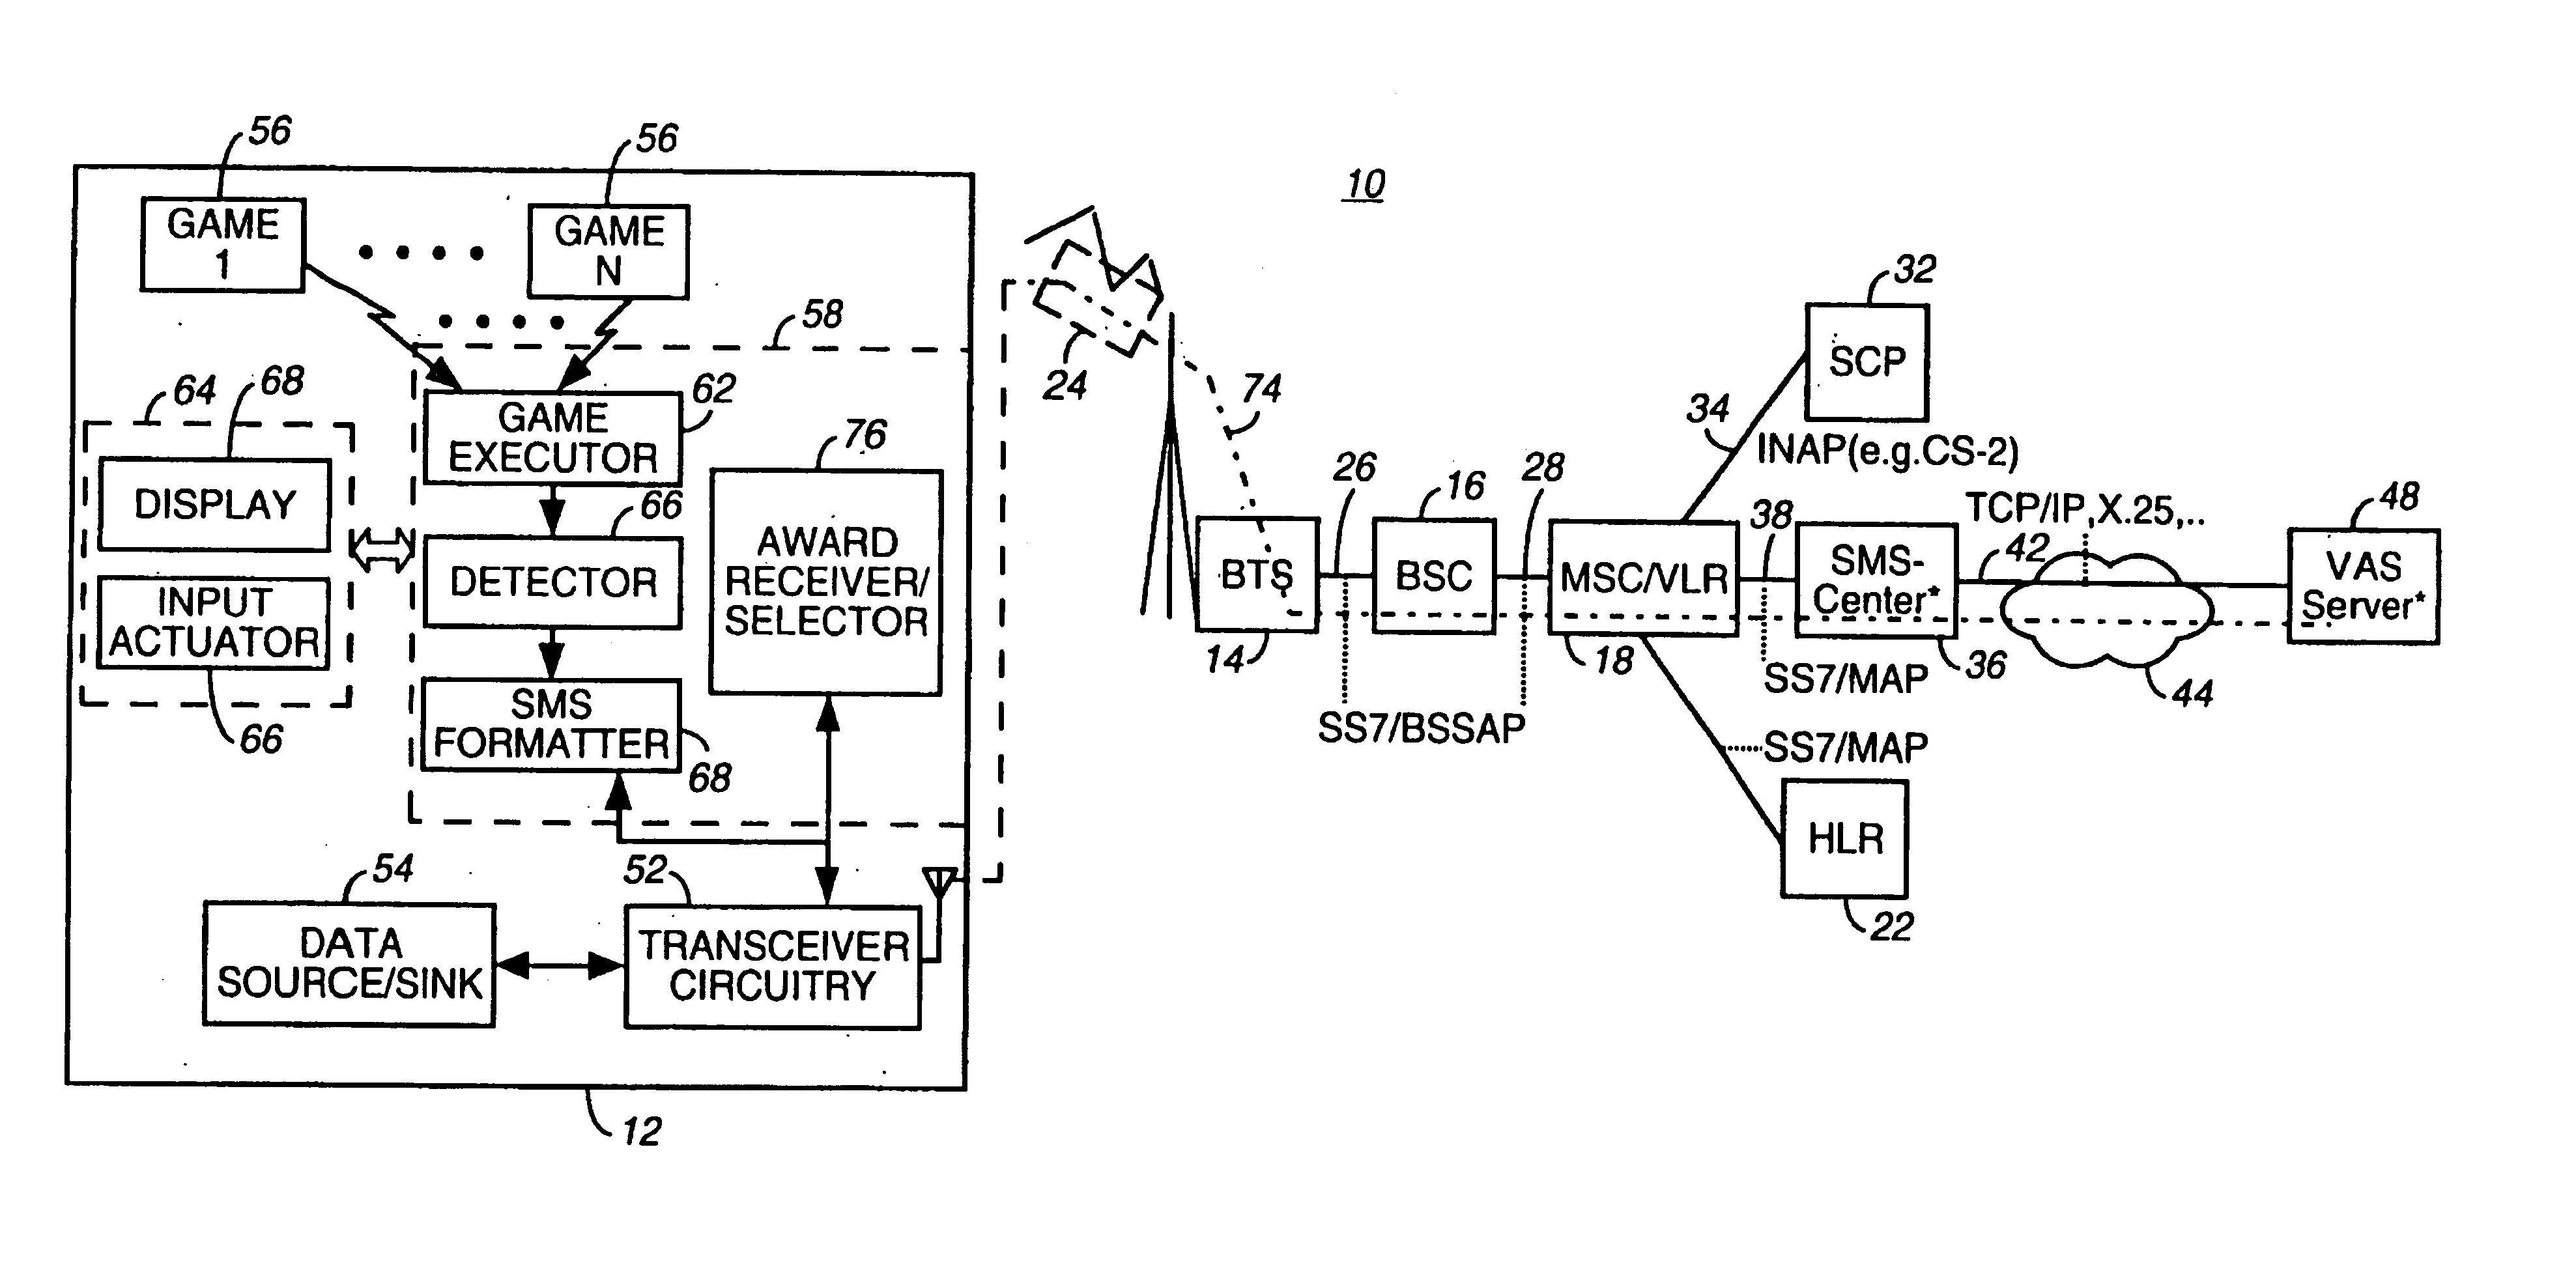 Reacreational reward-related apparatus, and associated method, for rewarding performance of execution of a recreation application at a mobile terminal